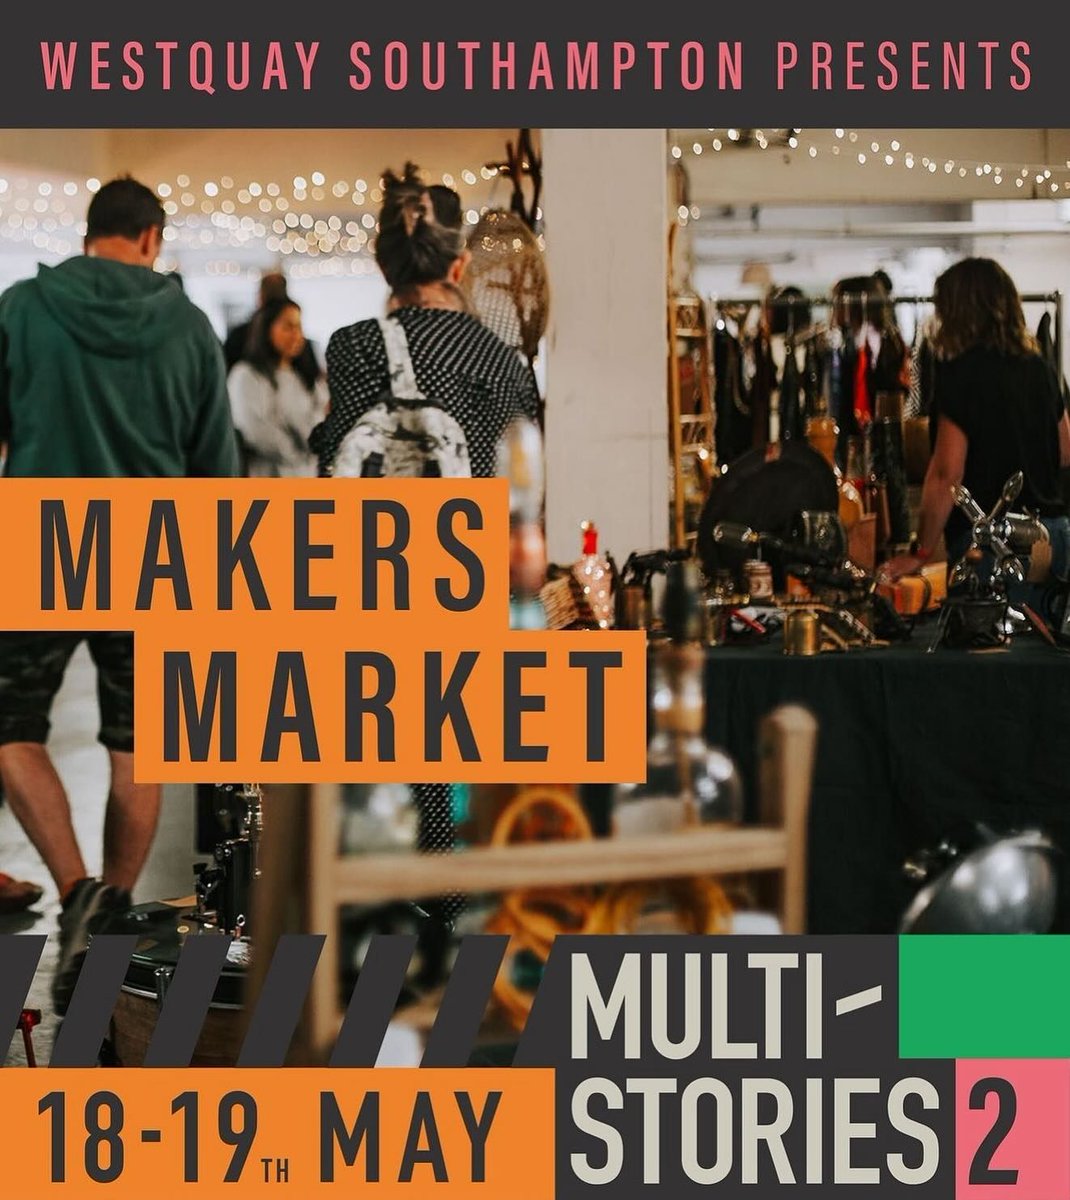 Southampton Forward and Westquay are on the lookout for a diverse range of creatives to participate in their South Coast Makers Market, part of the Multi-Stories event on 18-19 May. Learn more here: buff.ly/49SHkJD